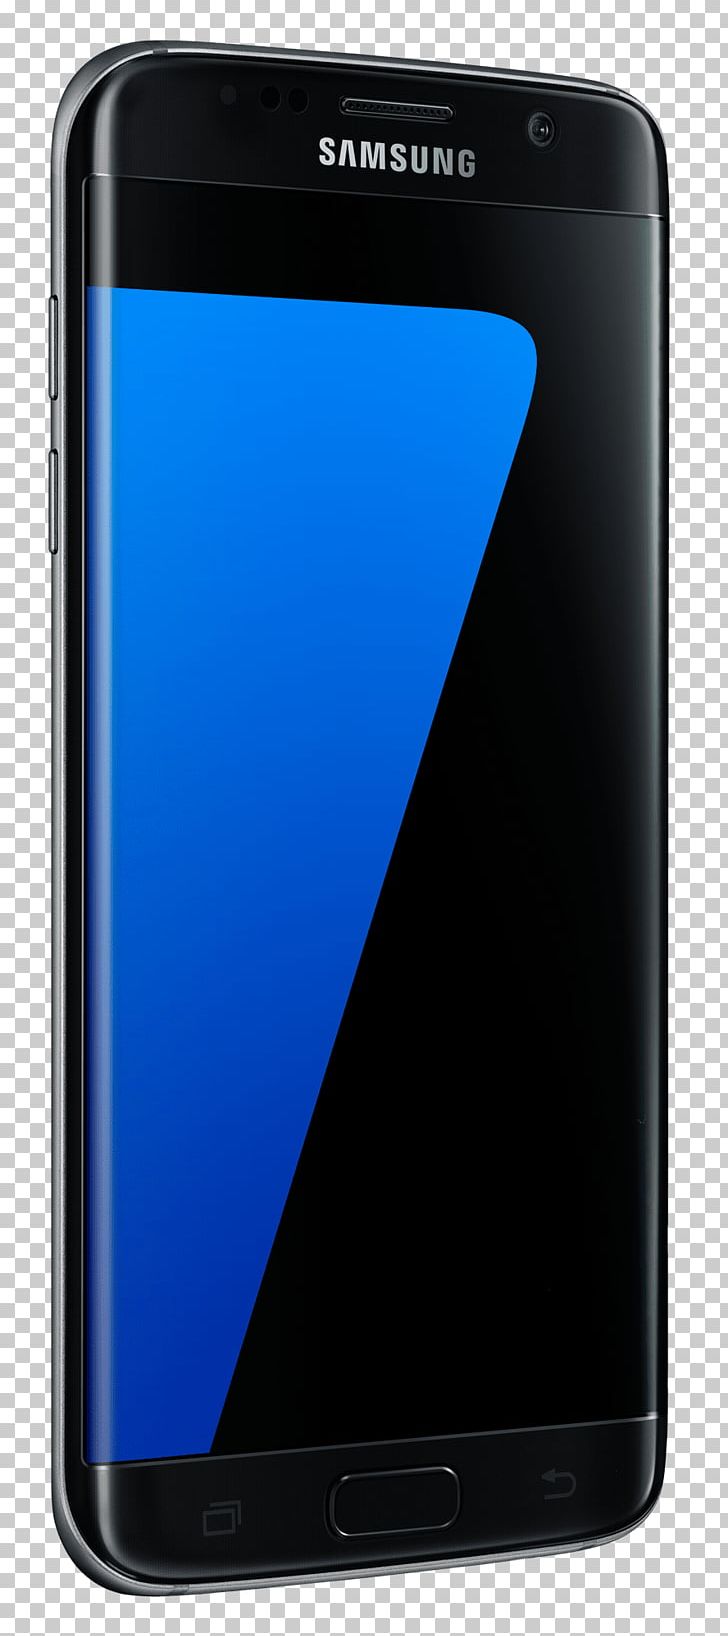 Samsung Super AMOLED Smartphone Android Display Device PNG, Clipart, Android, Electric Blue, Electronic Device, Gadget, Mobile Free PNG Download